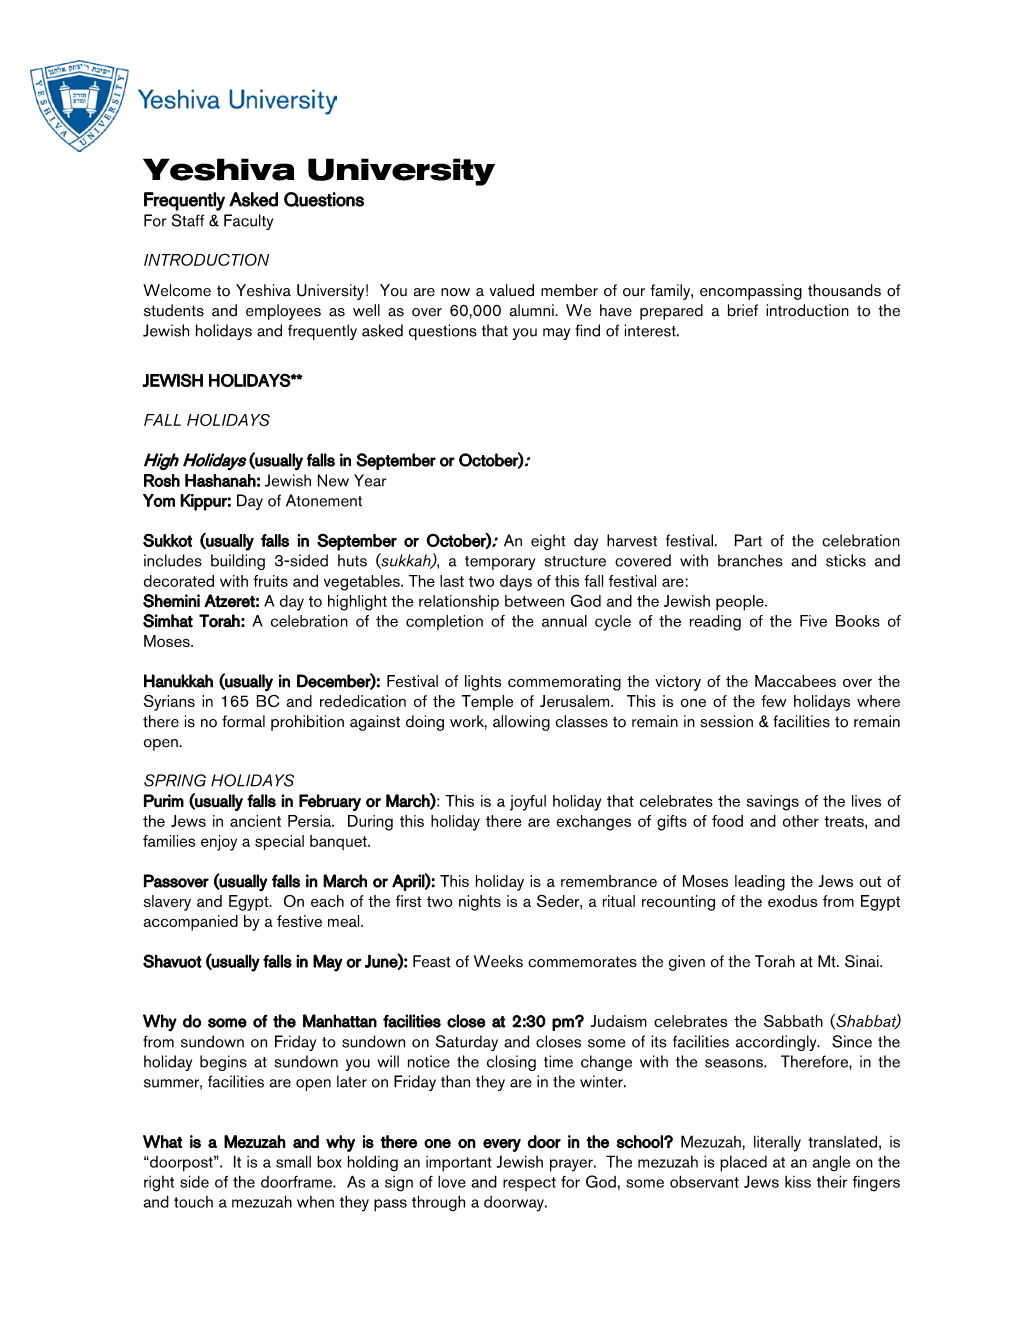 Yeshiva University Frequently Asked Questions for Staff & Faculty